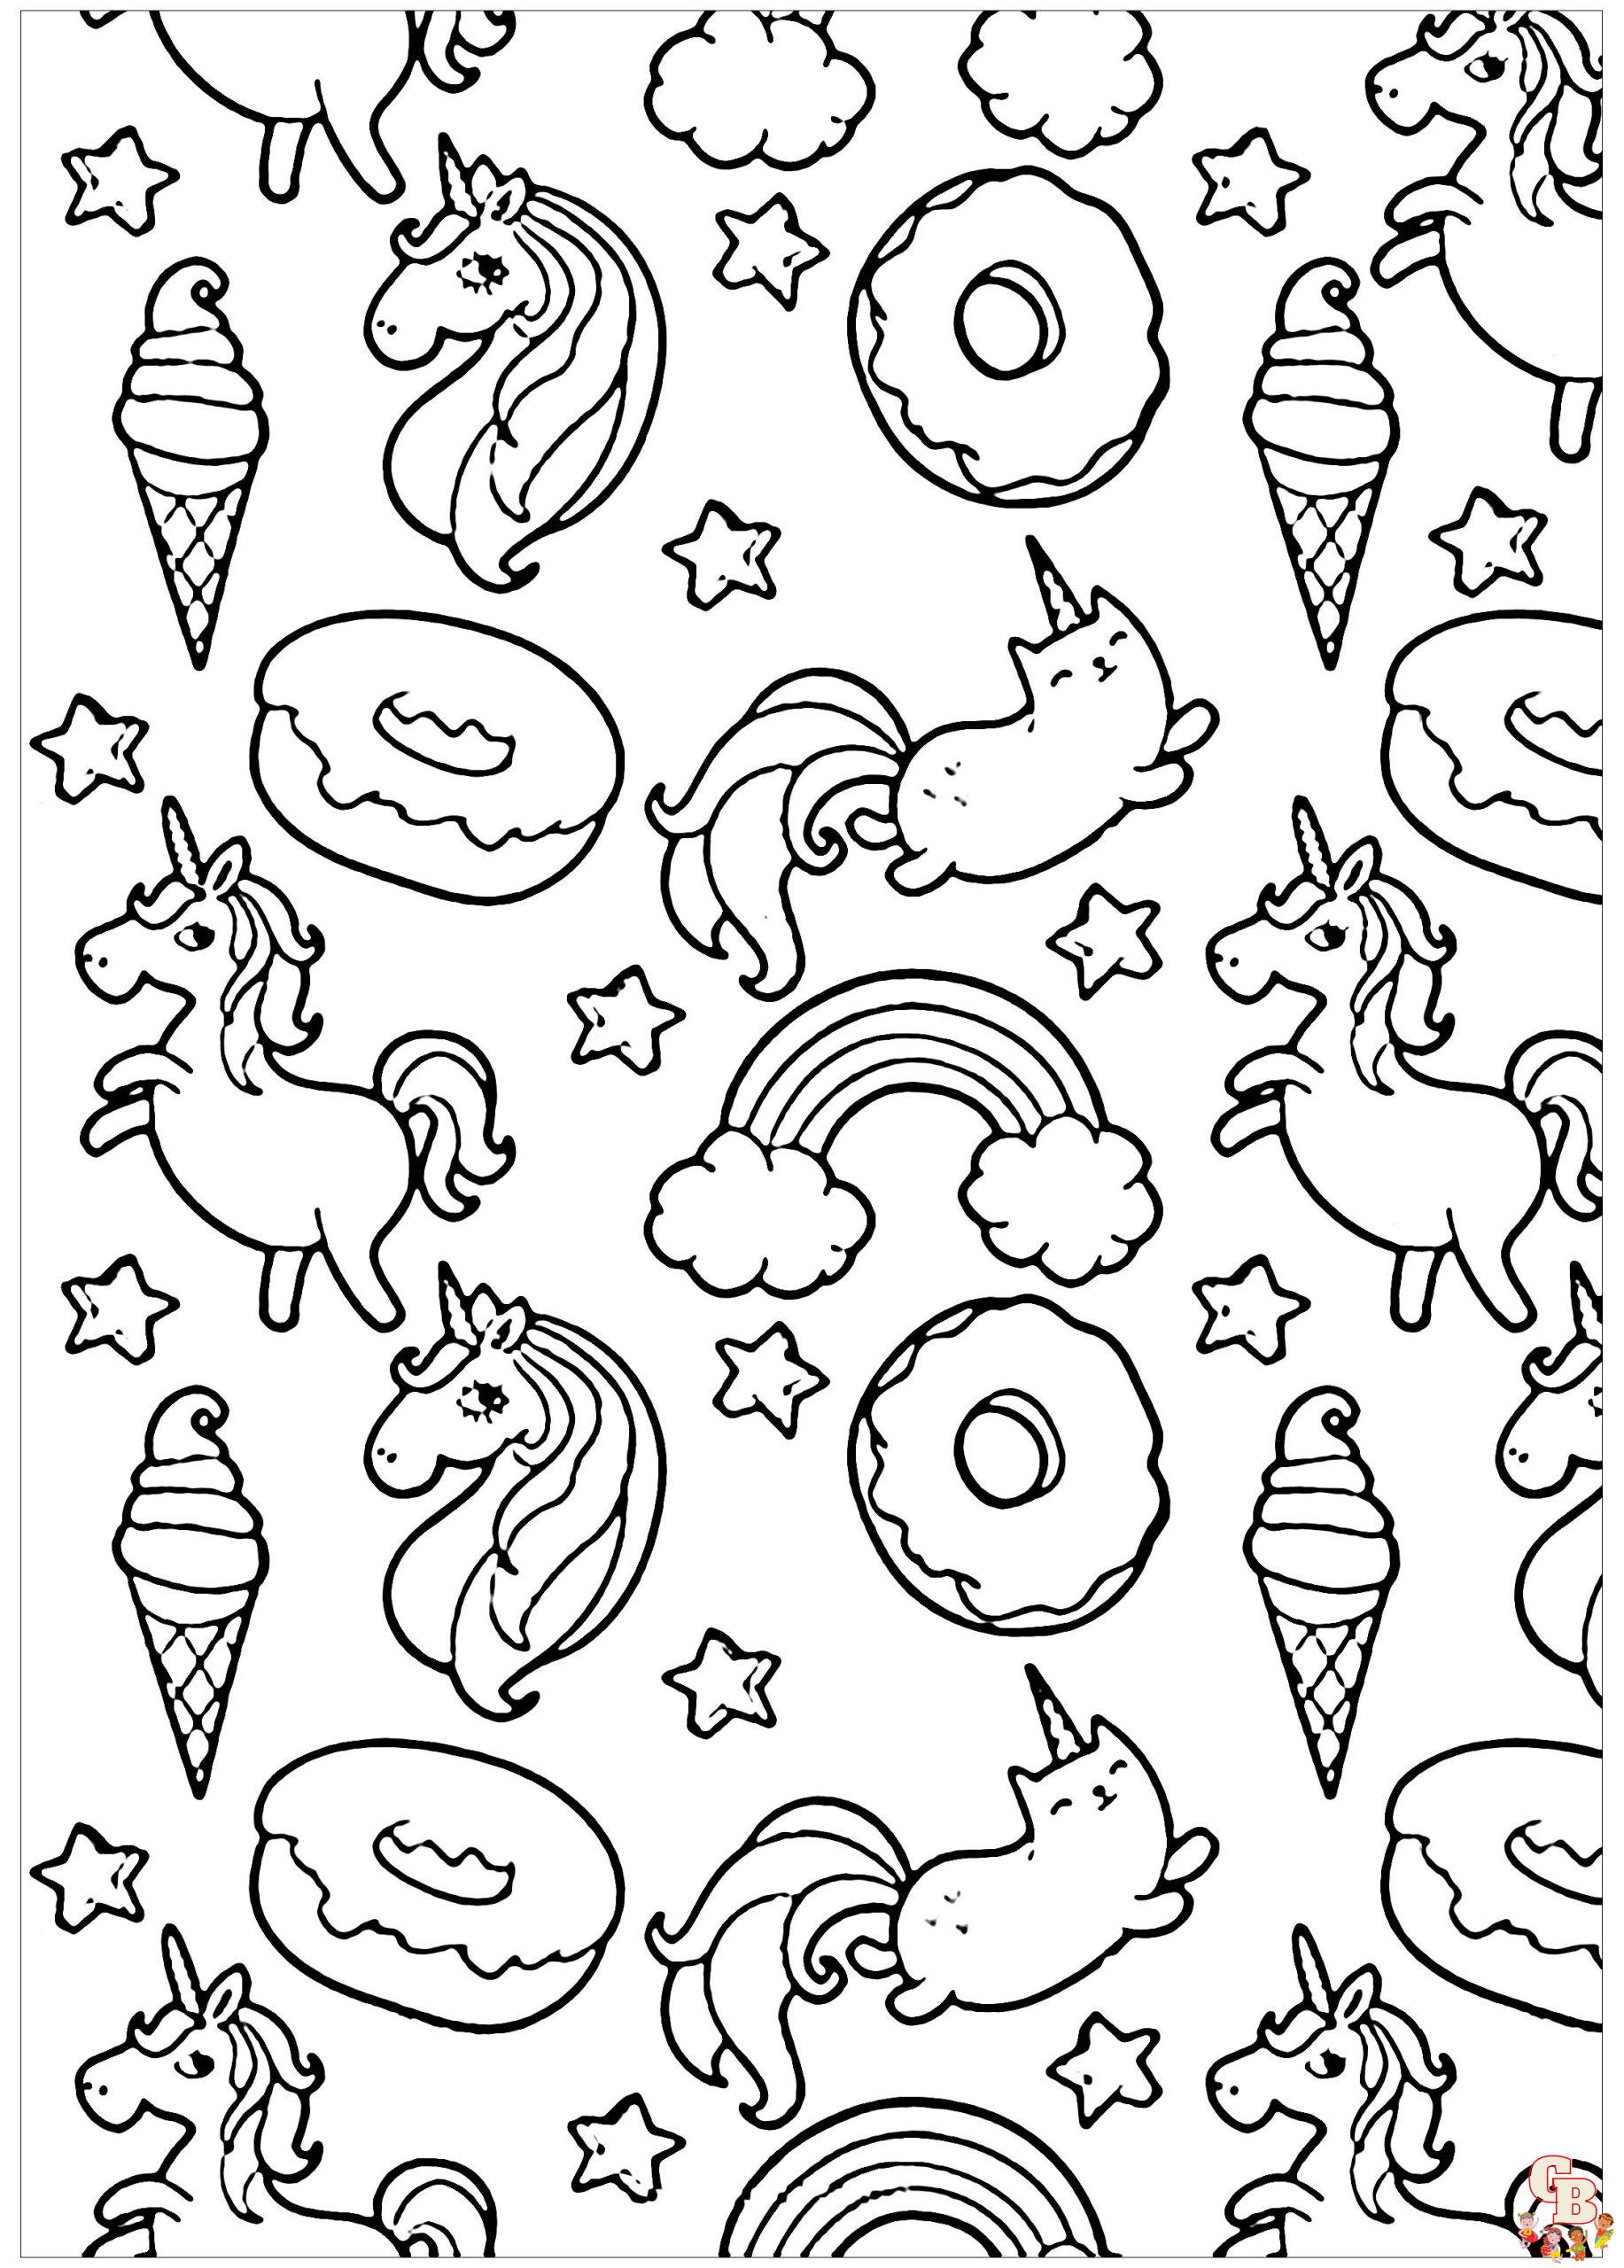 Cute Doodle Coloring Pages 2